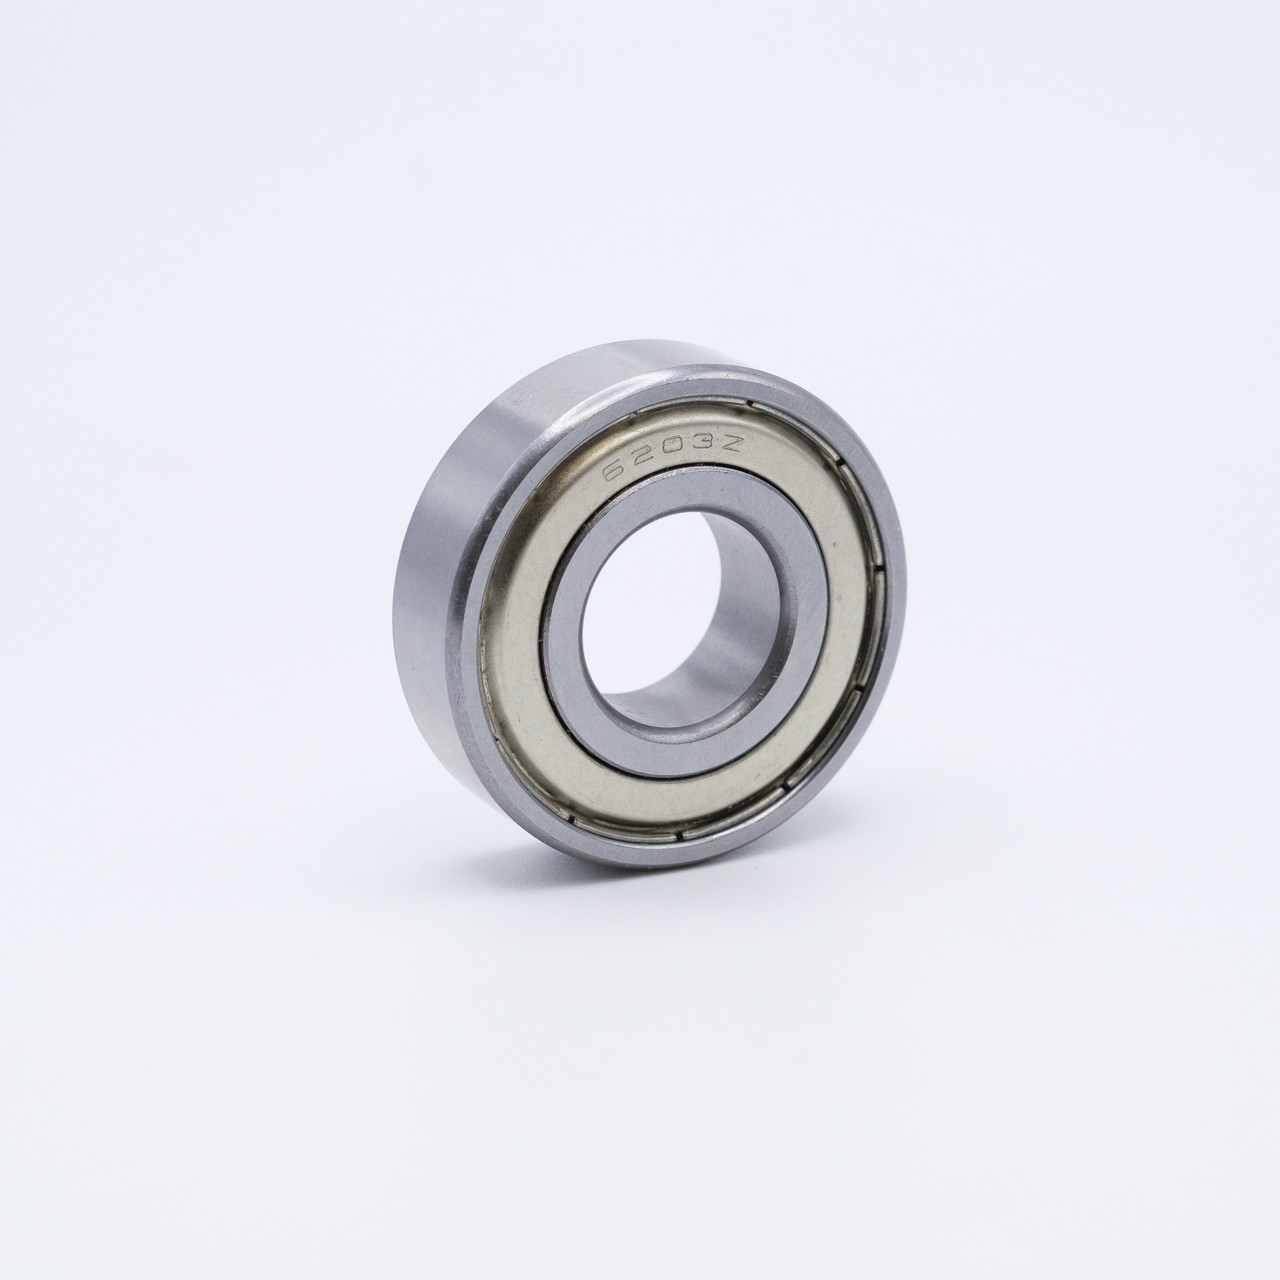 SS6205-ZZ Stainless Steel Ball Bearing 25x52x15 Angled View